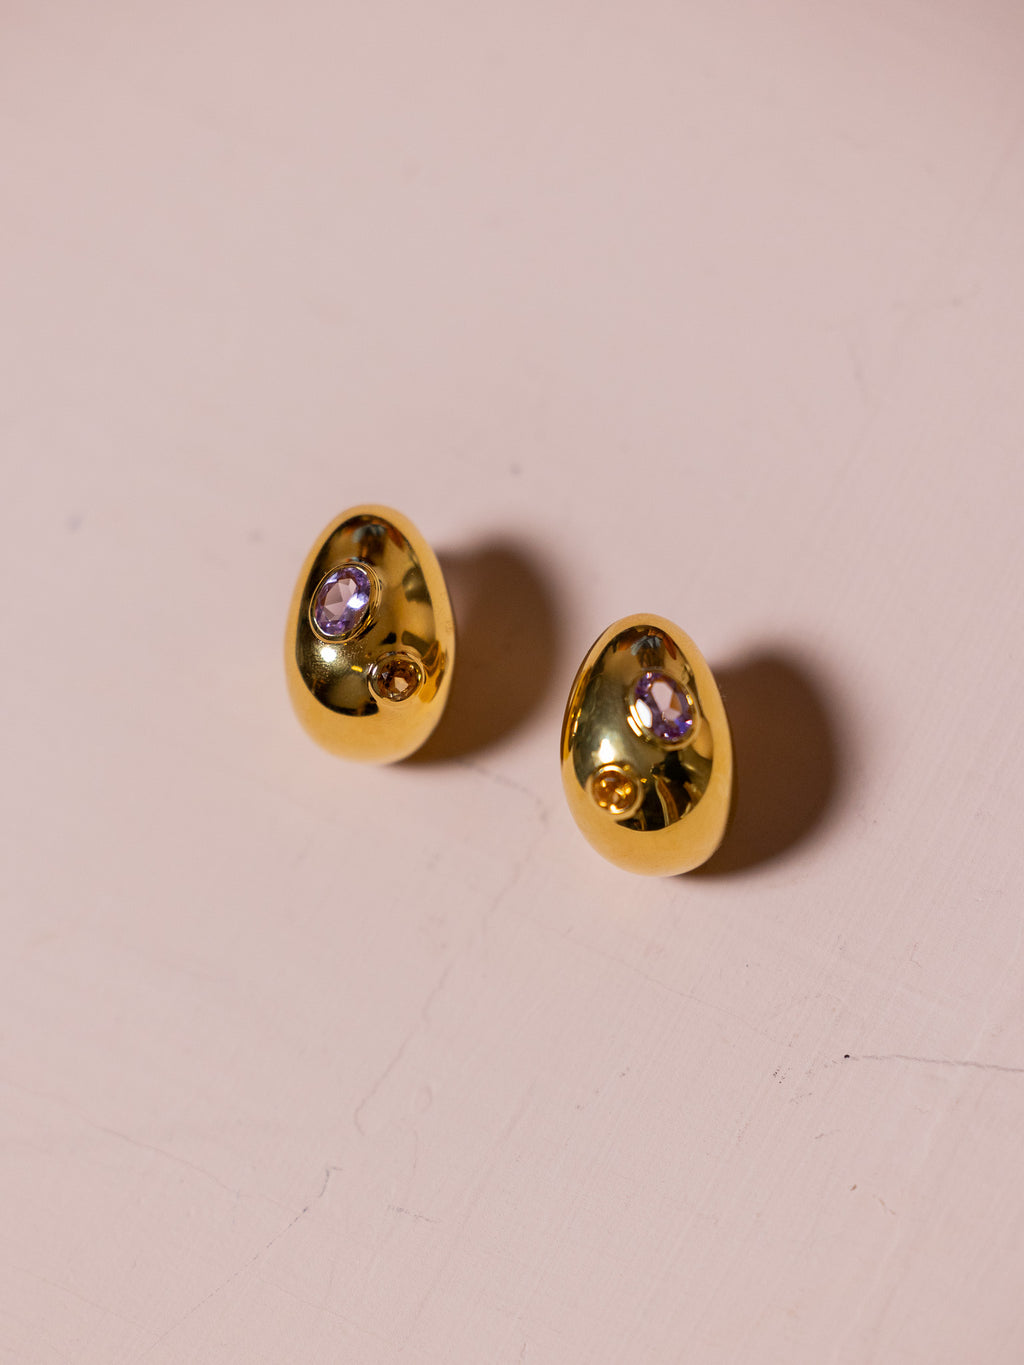 Gold earrings with inlaid jewels against pink background.